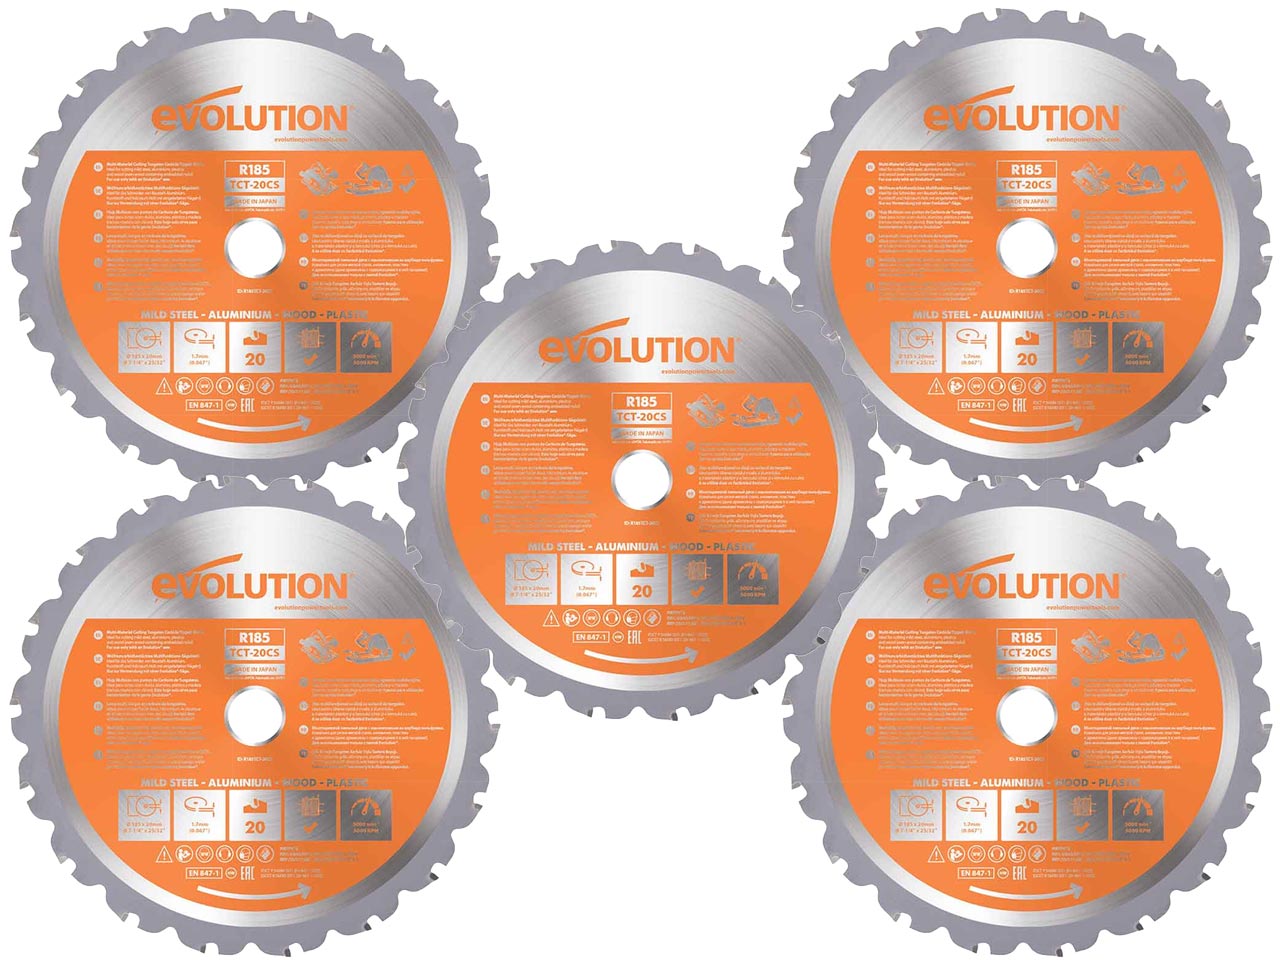 Evolution Power Tools R185TCT-20MS 185 mm Multi Material Mitre Saw Blade  (AKA TCT Saw Blade, Metal Cutting Blade, Wood Blade) - Carbide Tipped Blade  Cuts Wood, Metal and Plastic 